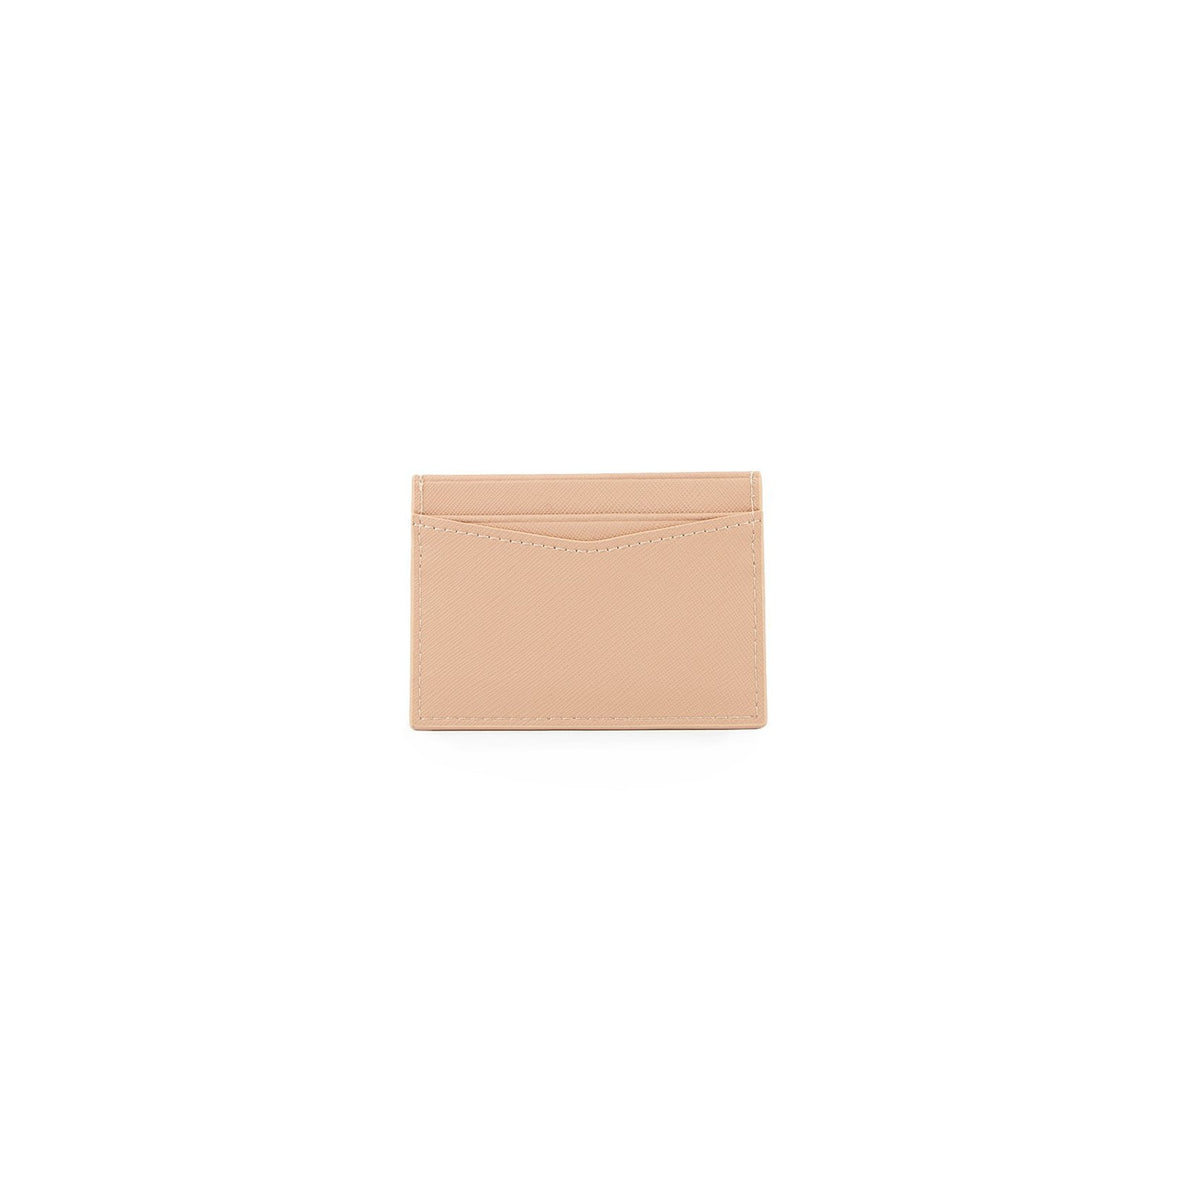 Personalised Card Holder - Nude Saffiano Leather